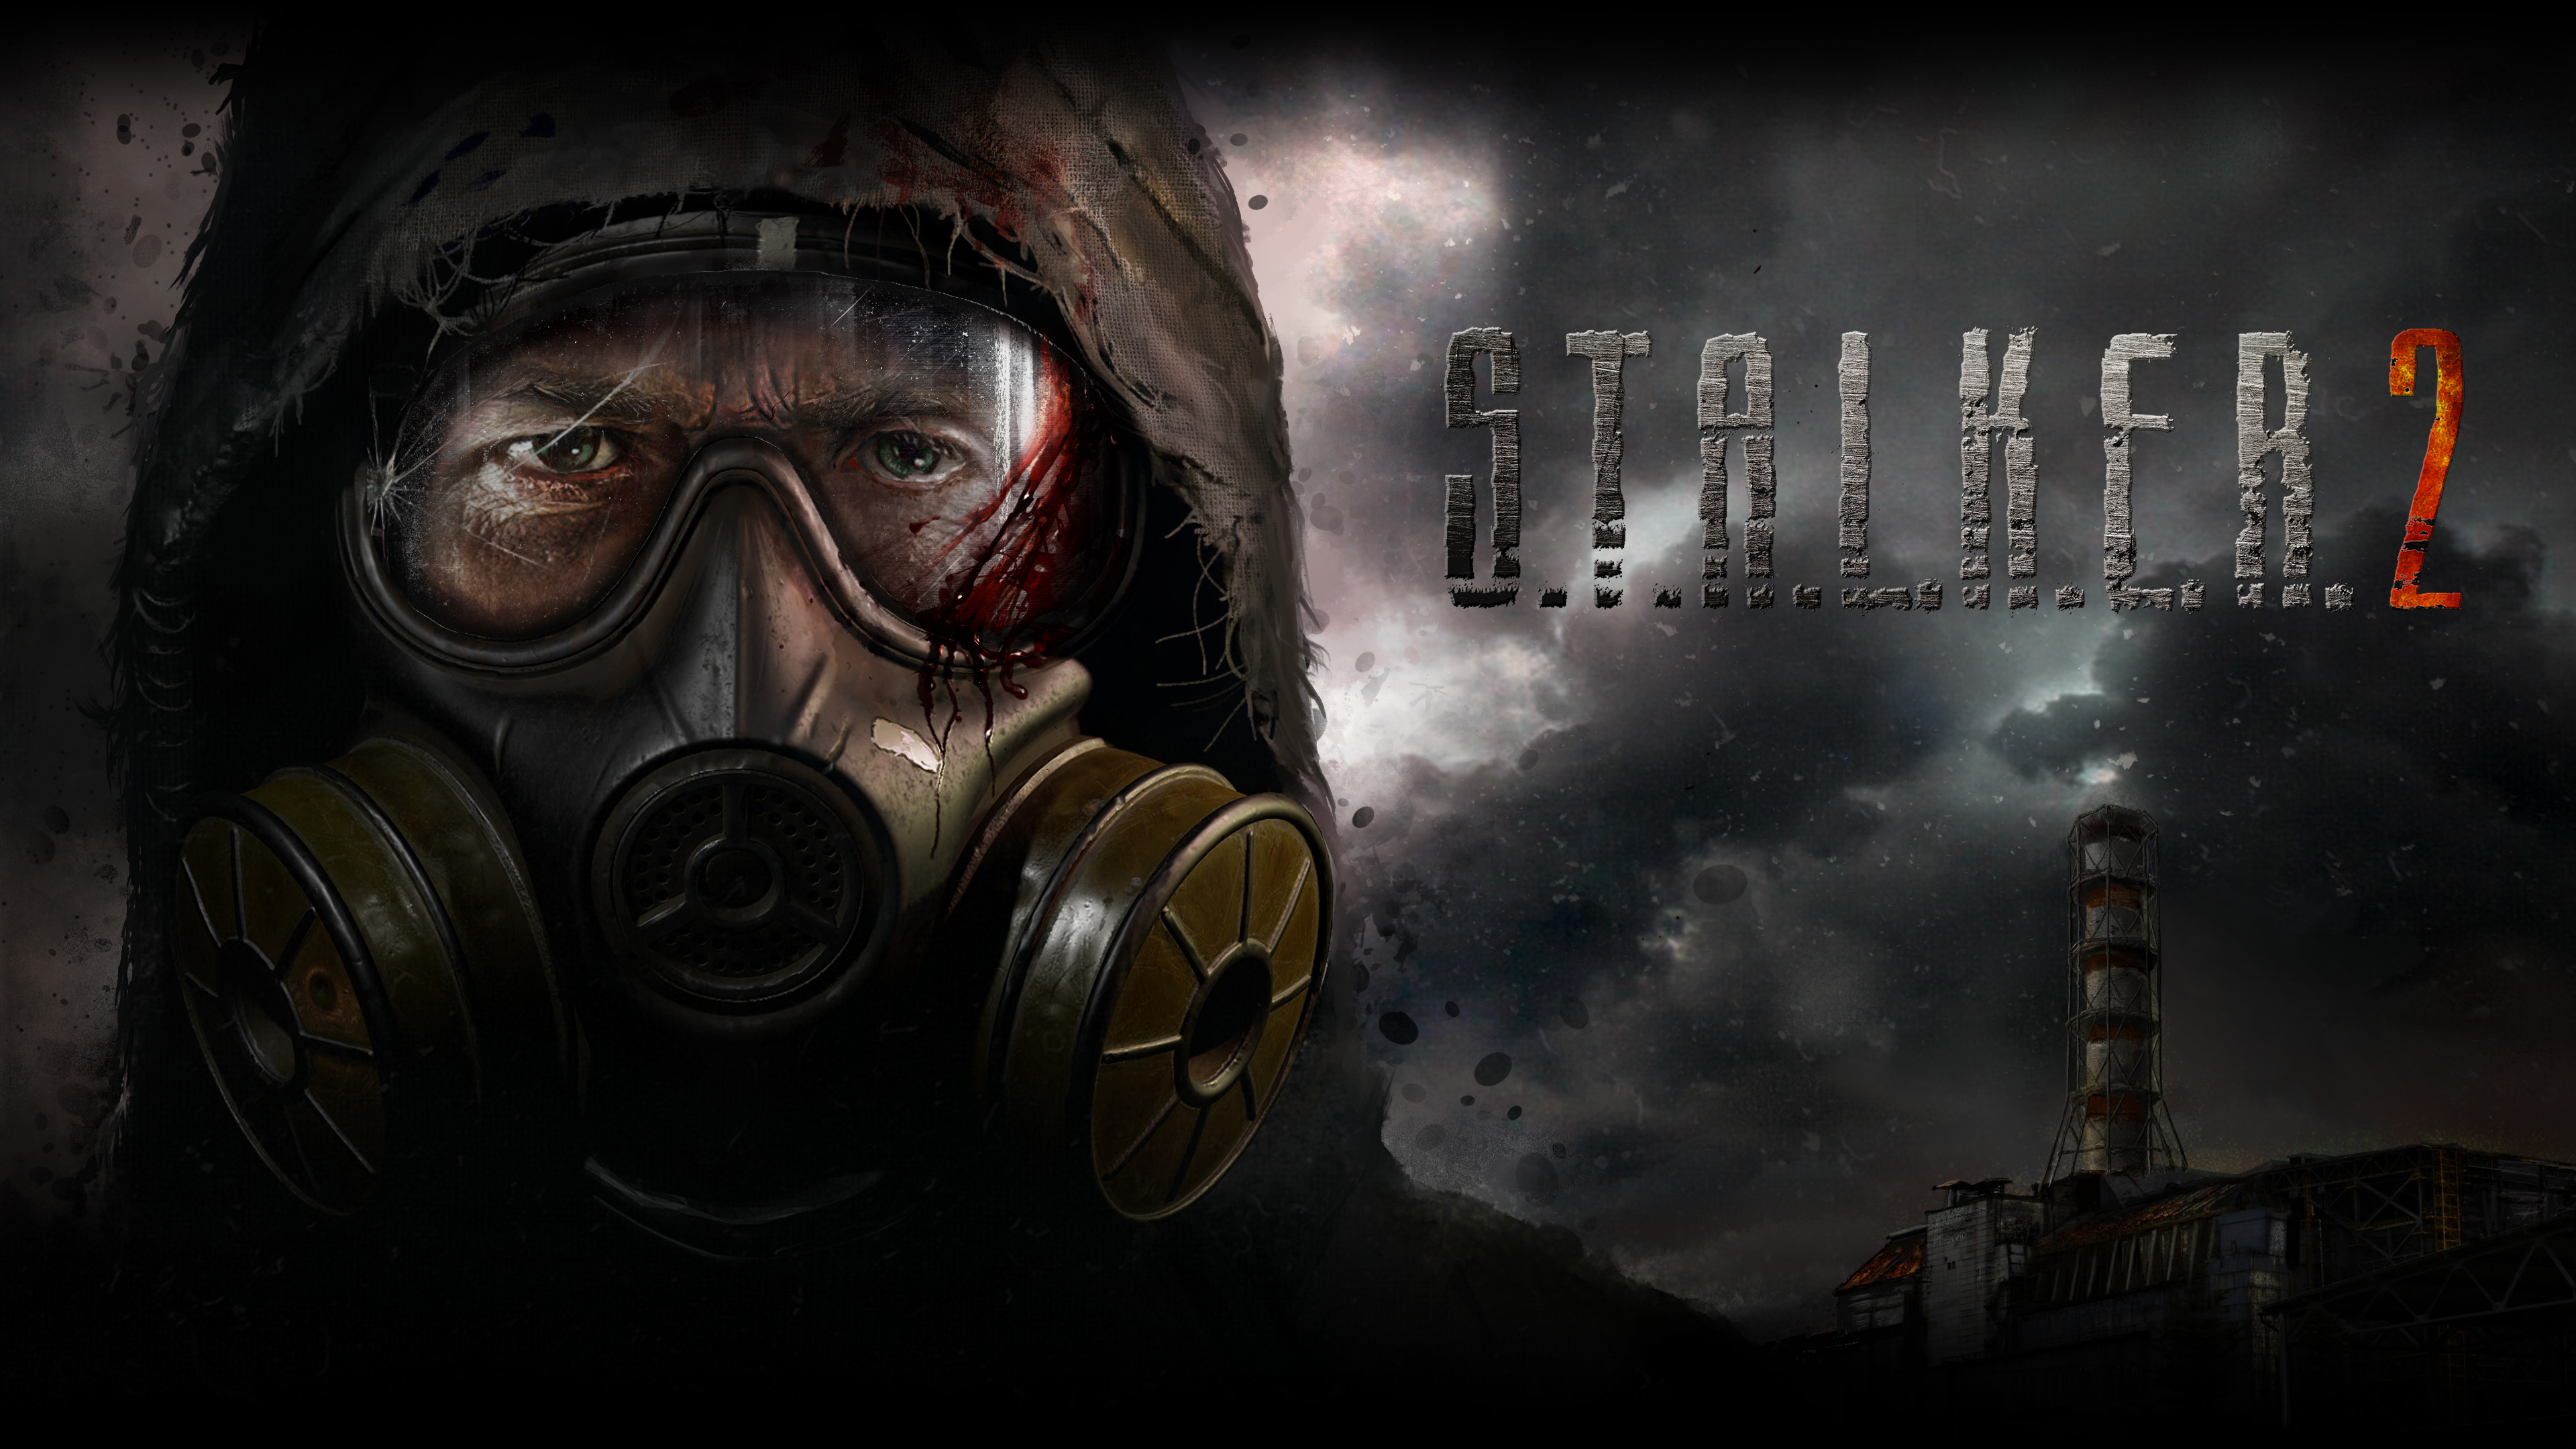 Fresh screenshots of S.T.A.L.K.E.R. 2 have been released. Gaming news -  eSports events review, analytics, announcements, interviews, statistics -  ta4CAlq79